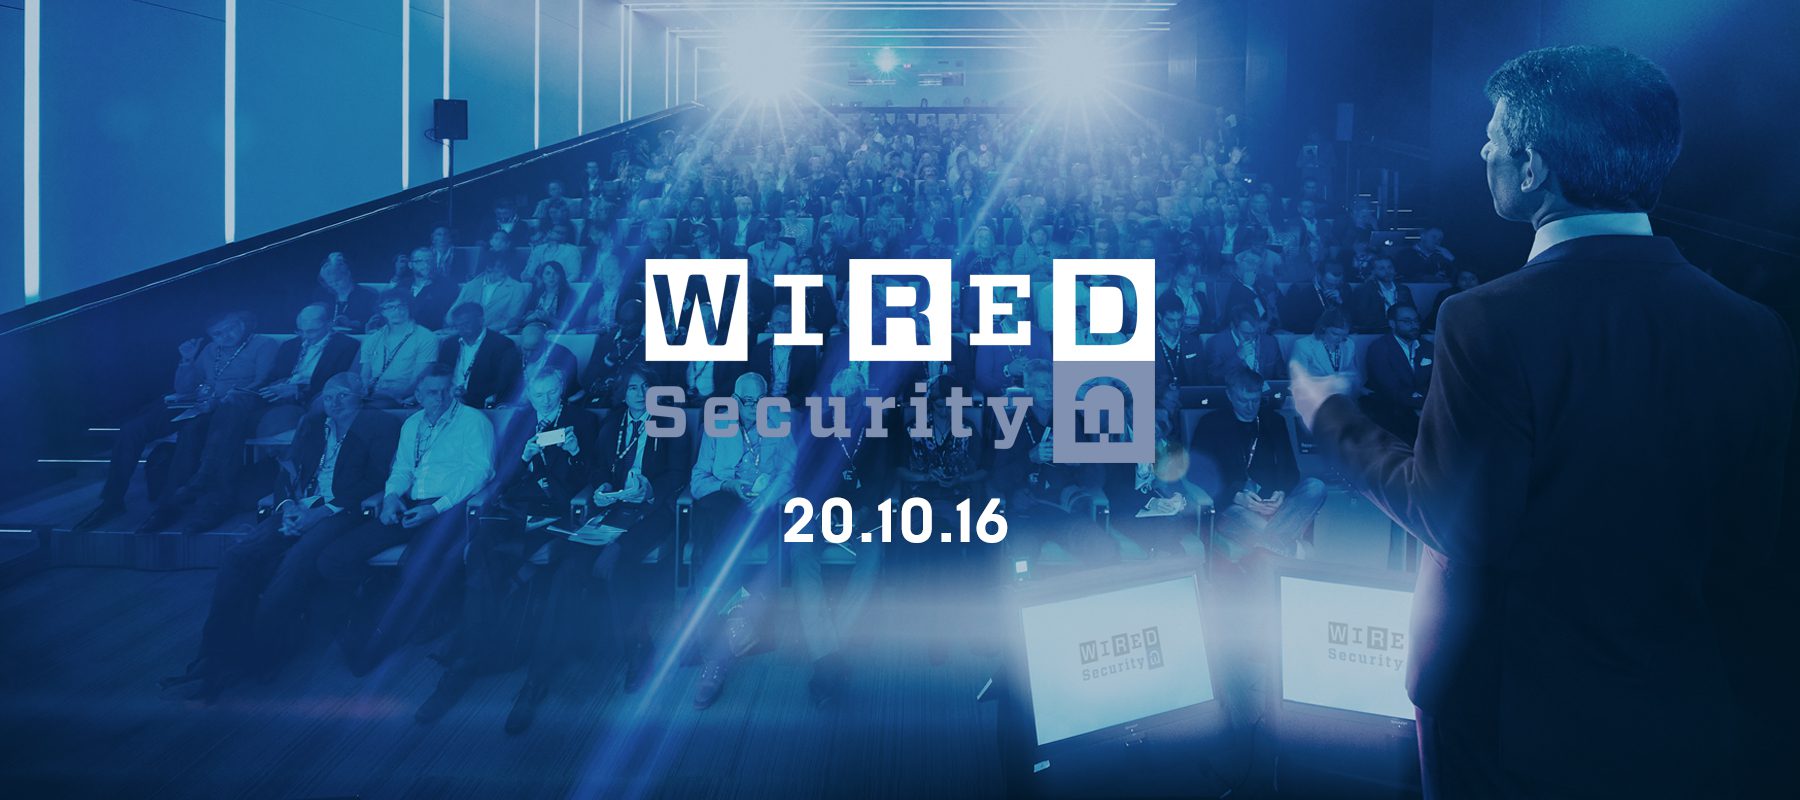 Wired security conference2016